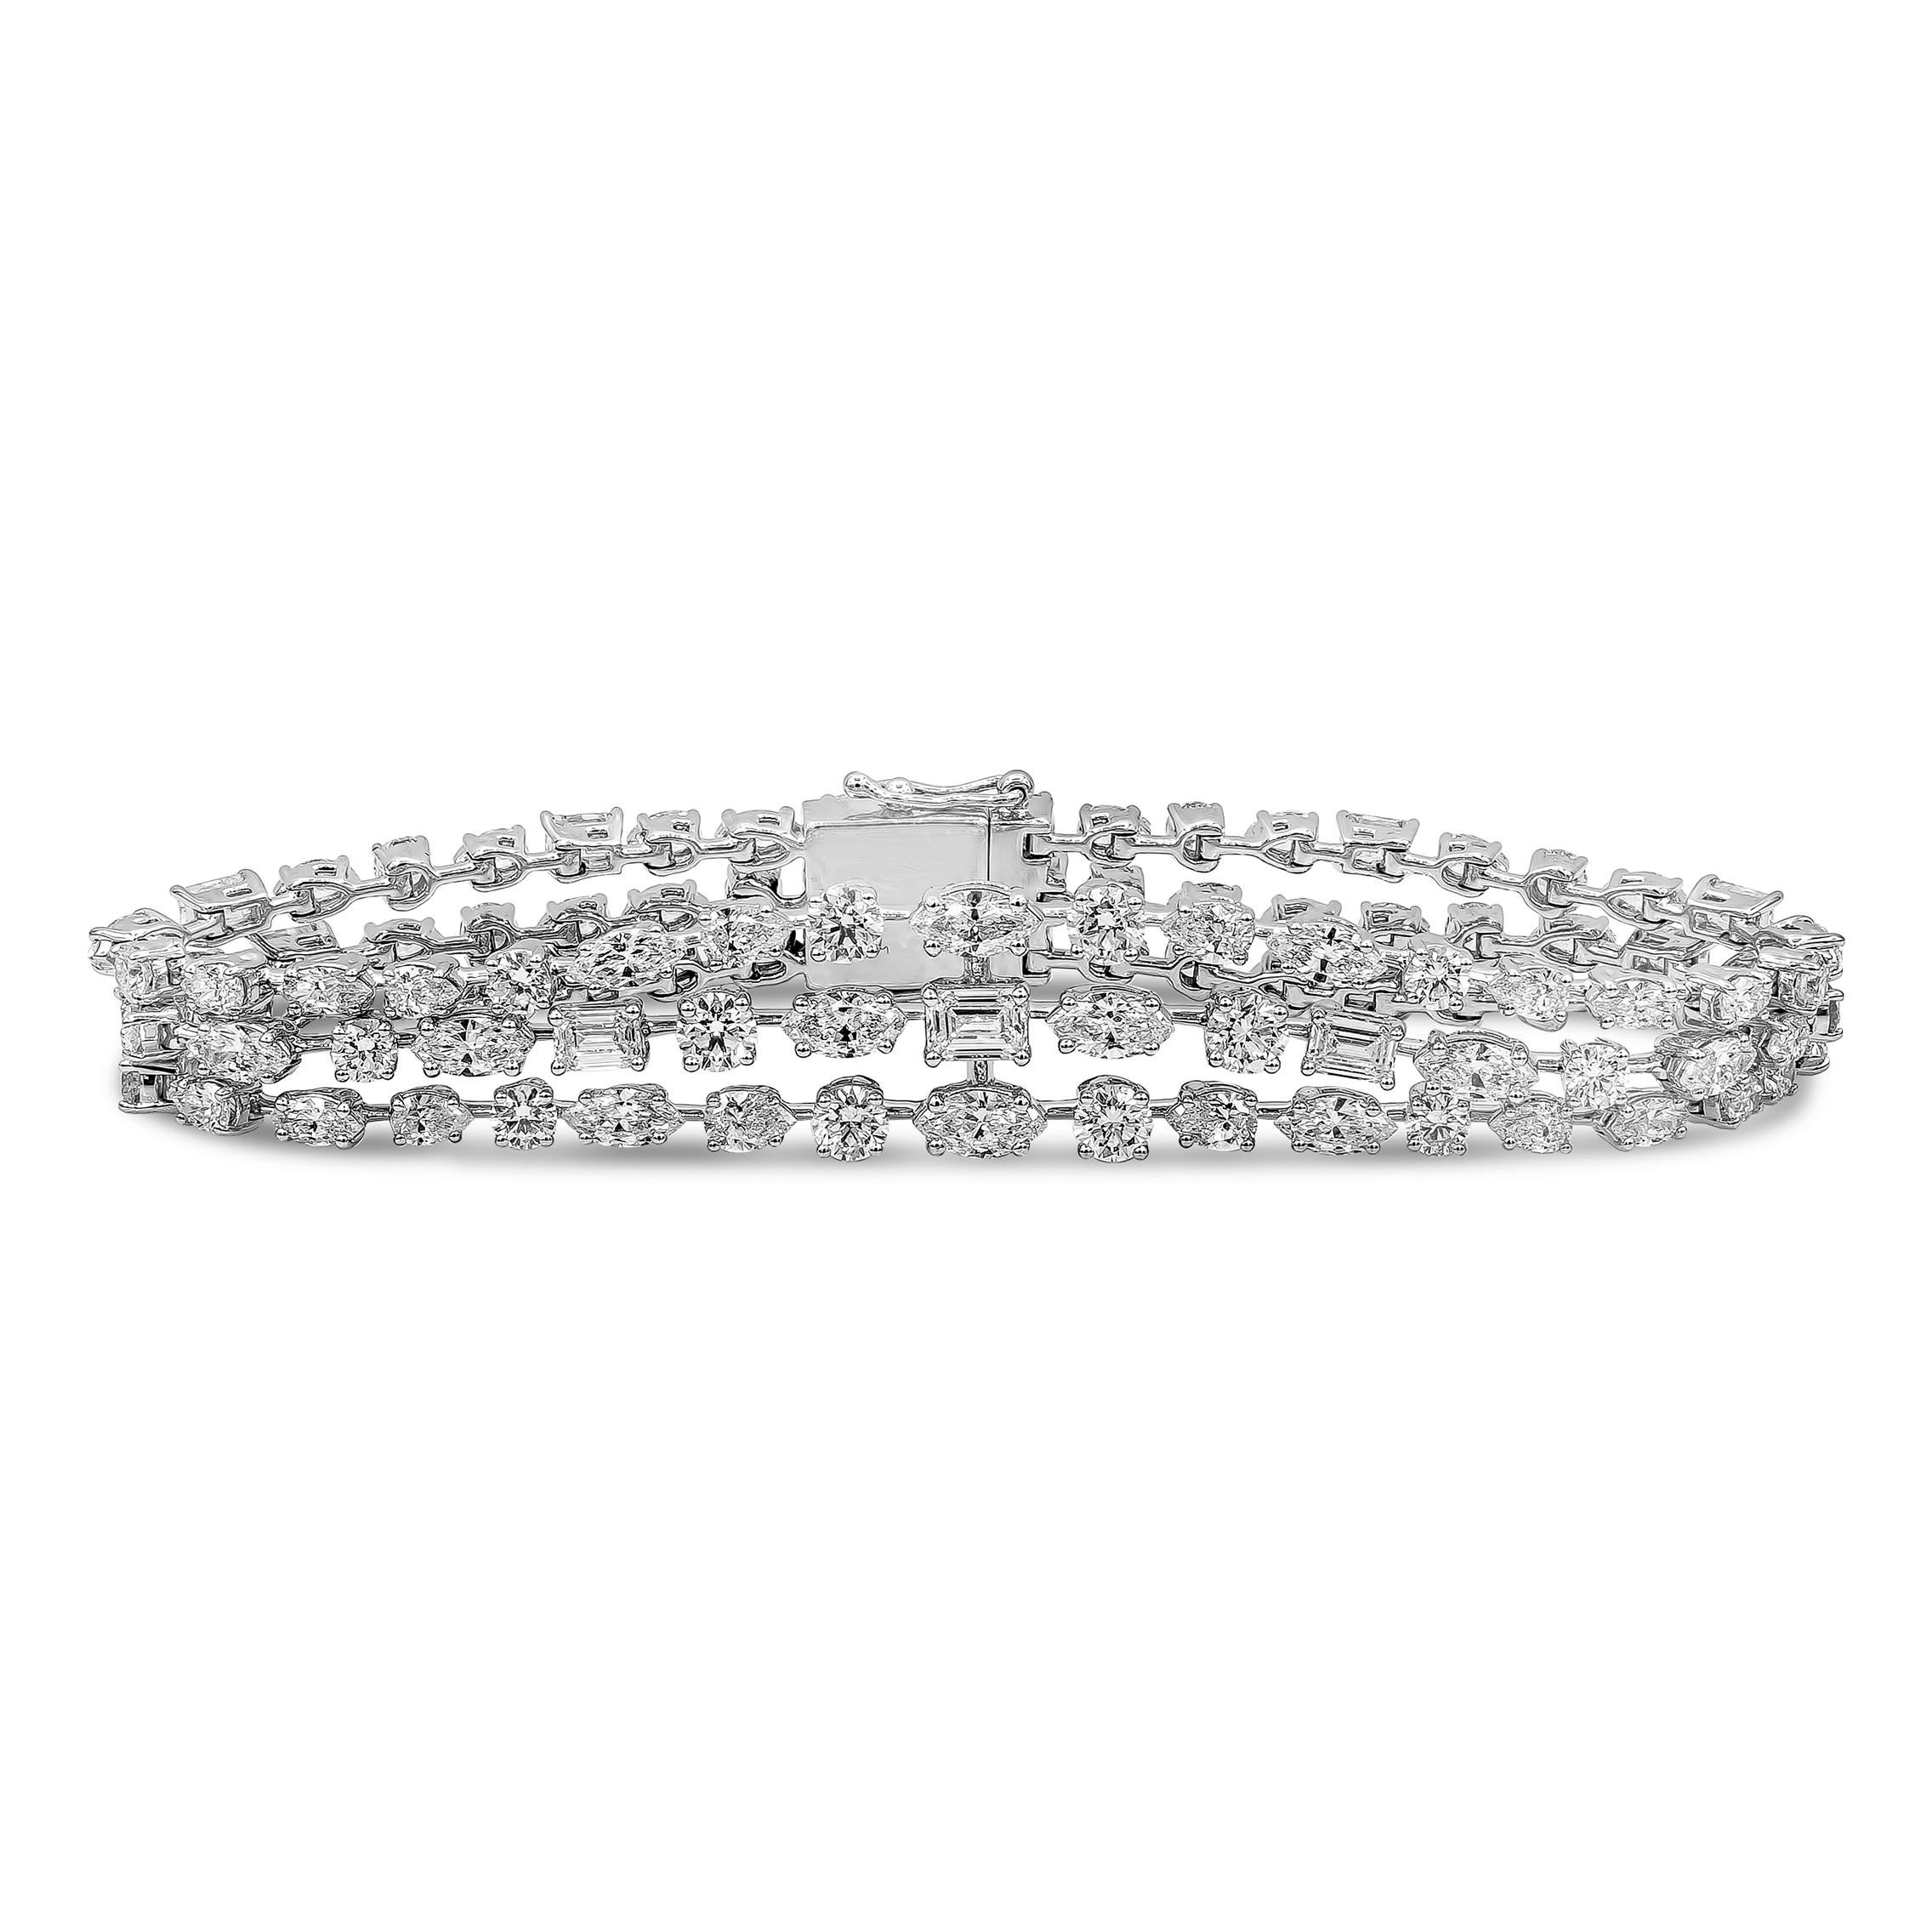 A fashionable and beautiful bracelet showcasing three-rows of Fancy shape diamonds that graduate larger as it gets to the center. Diamonds weigh 12.09 carats total and are approximately G-H color, VS-SI clarity. Made in 18k white gold.

Style